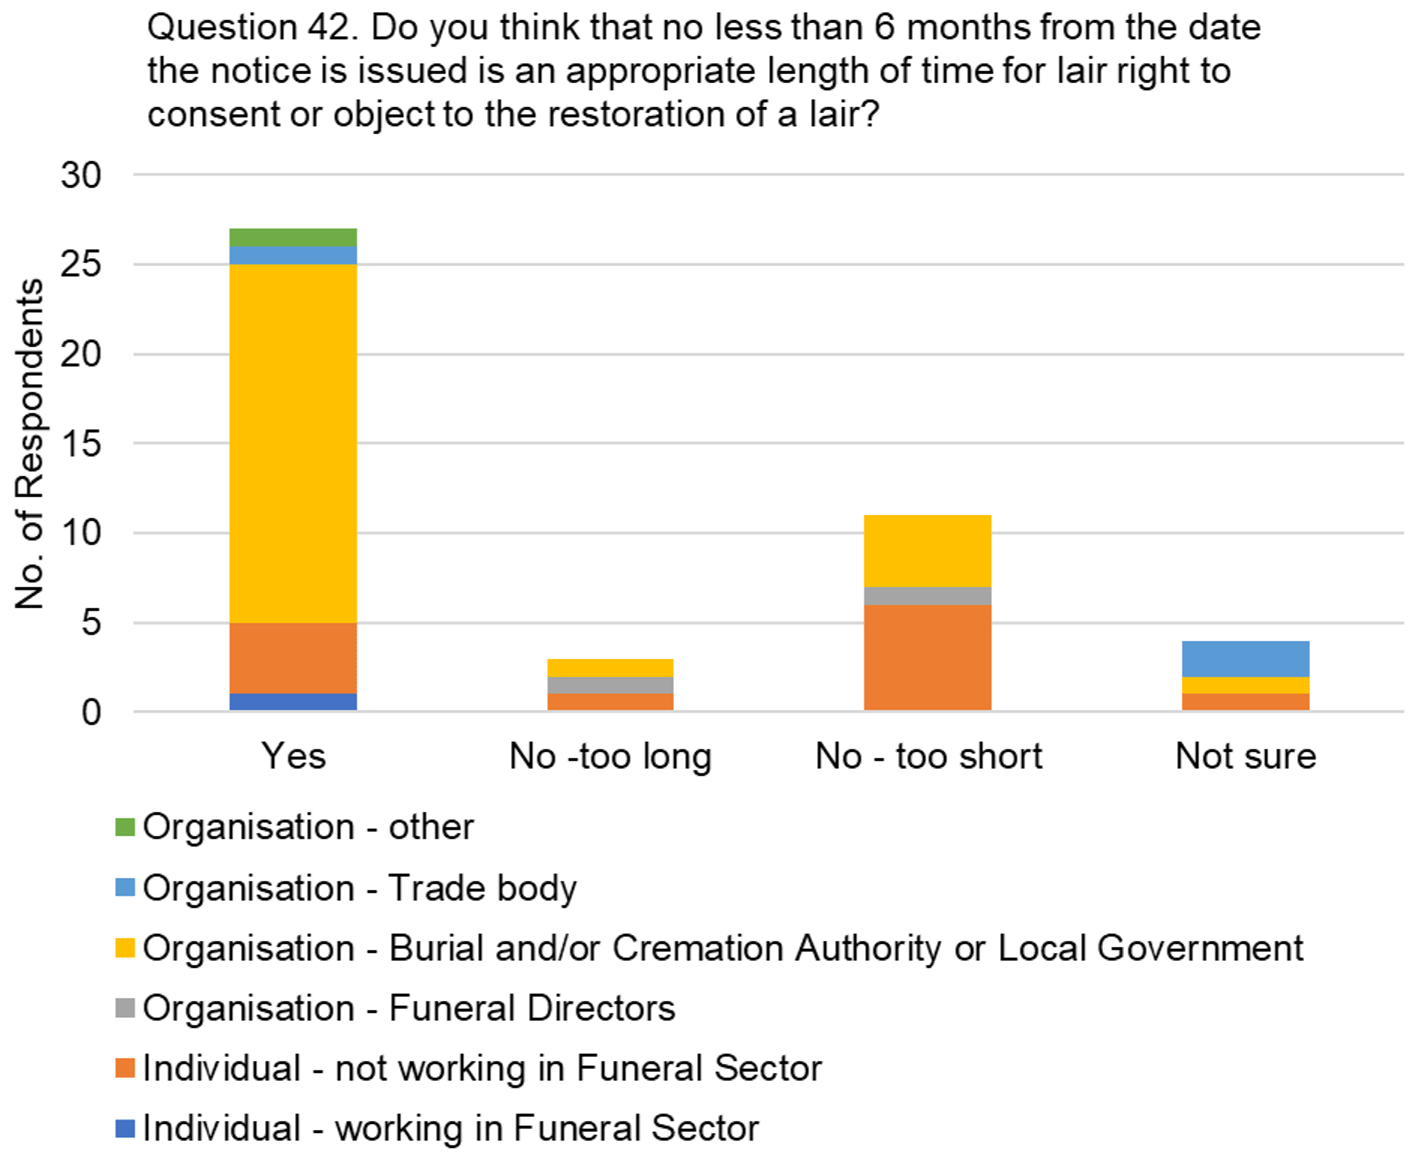 The graph visually presents the data from table 29, focussing on the responses to the question, "Do you think that no less than 6 months from the date the notice is issued is an appropriate length of time for the lair right-holder to consent or object to the restoration of a lair?"